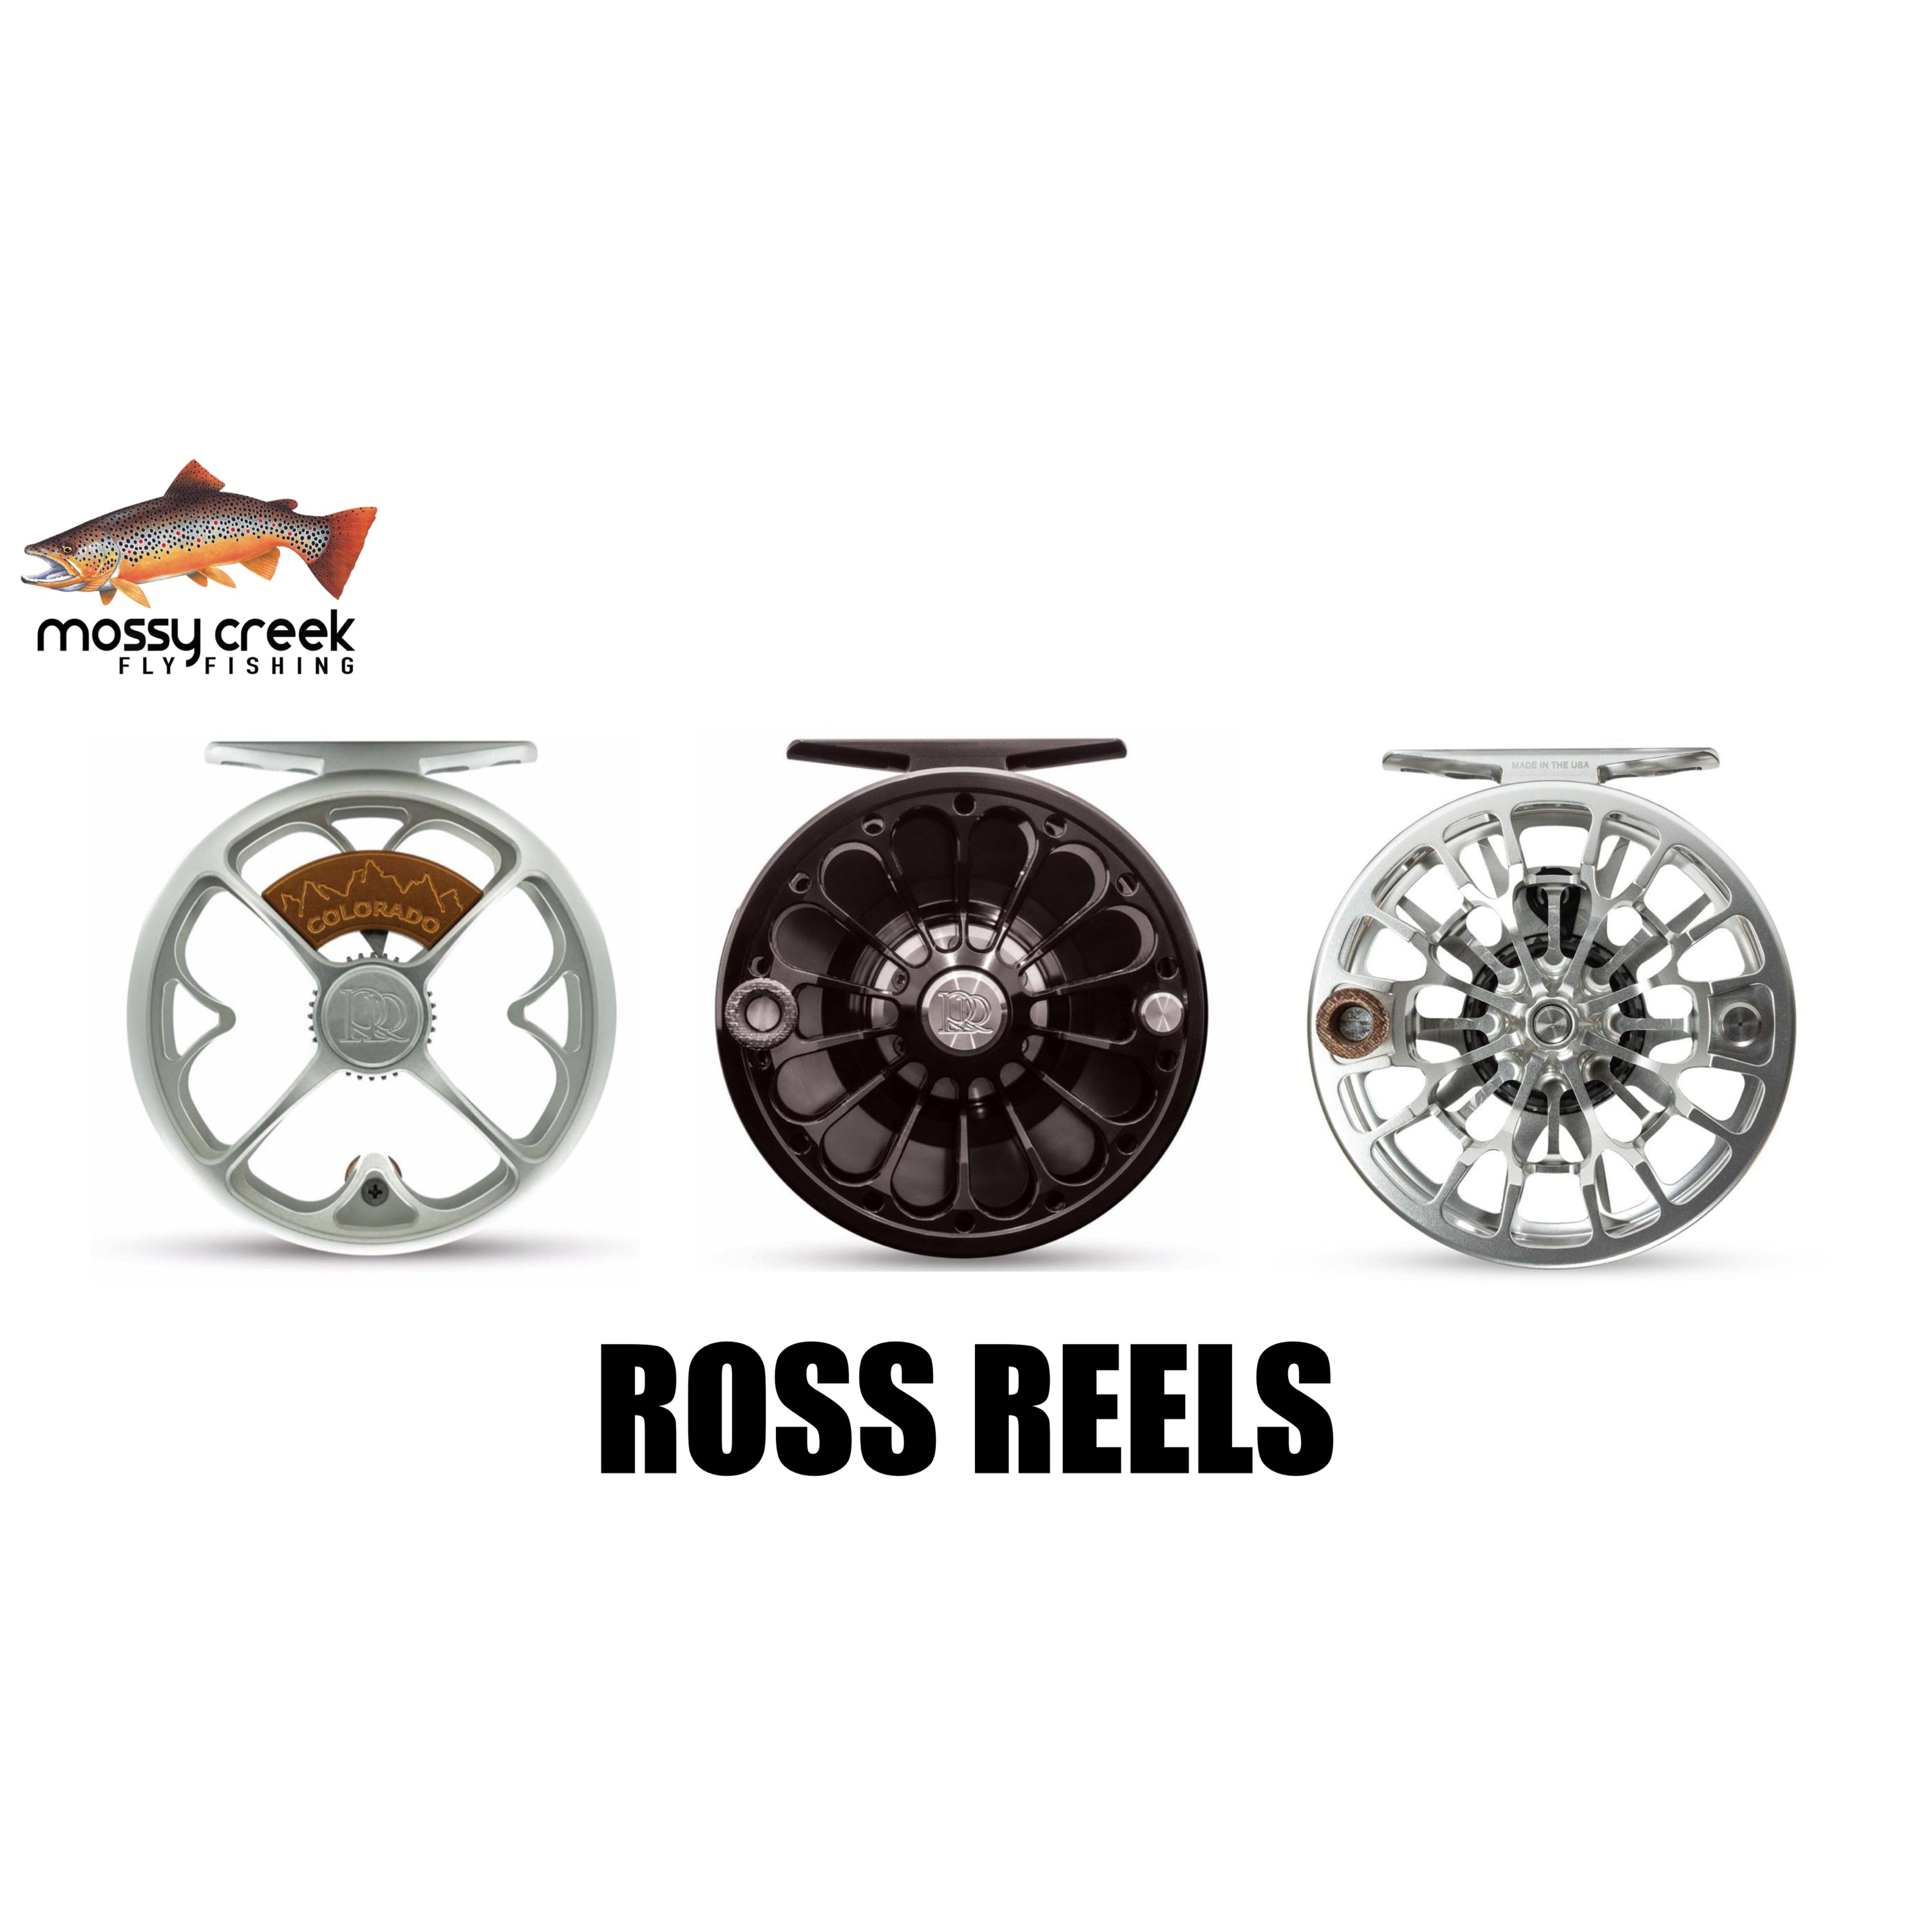 ross reels — Blog — Colorado Trout Unlimited